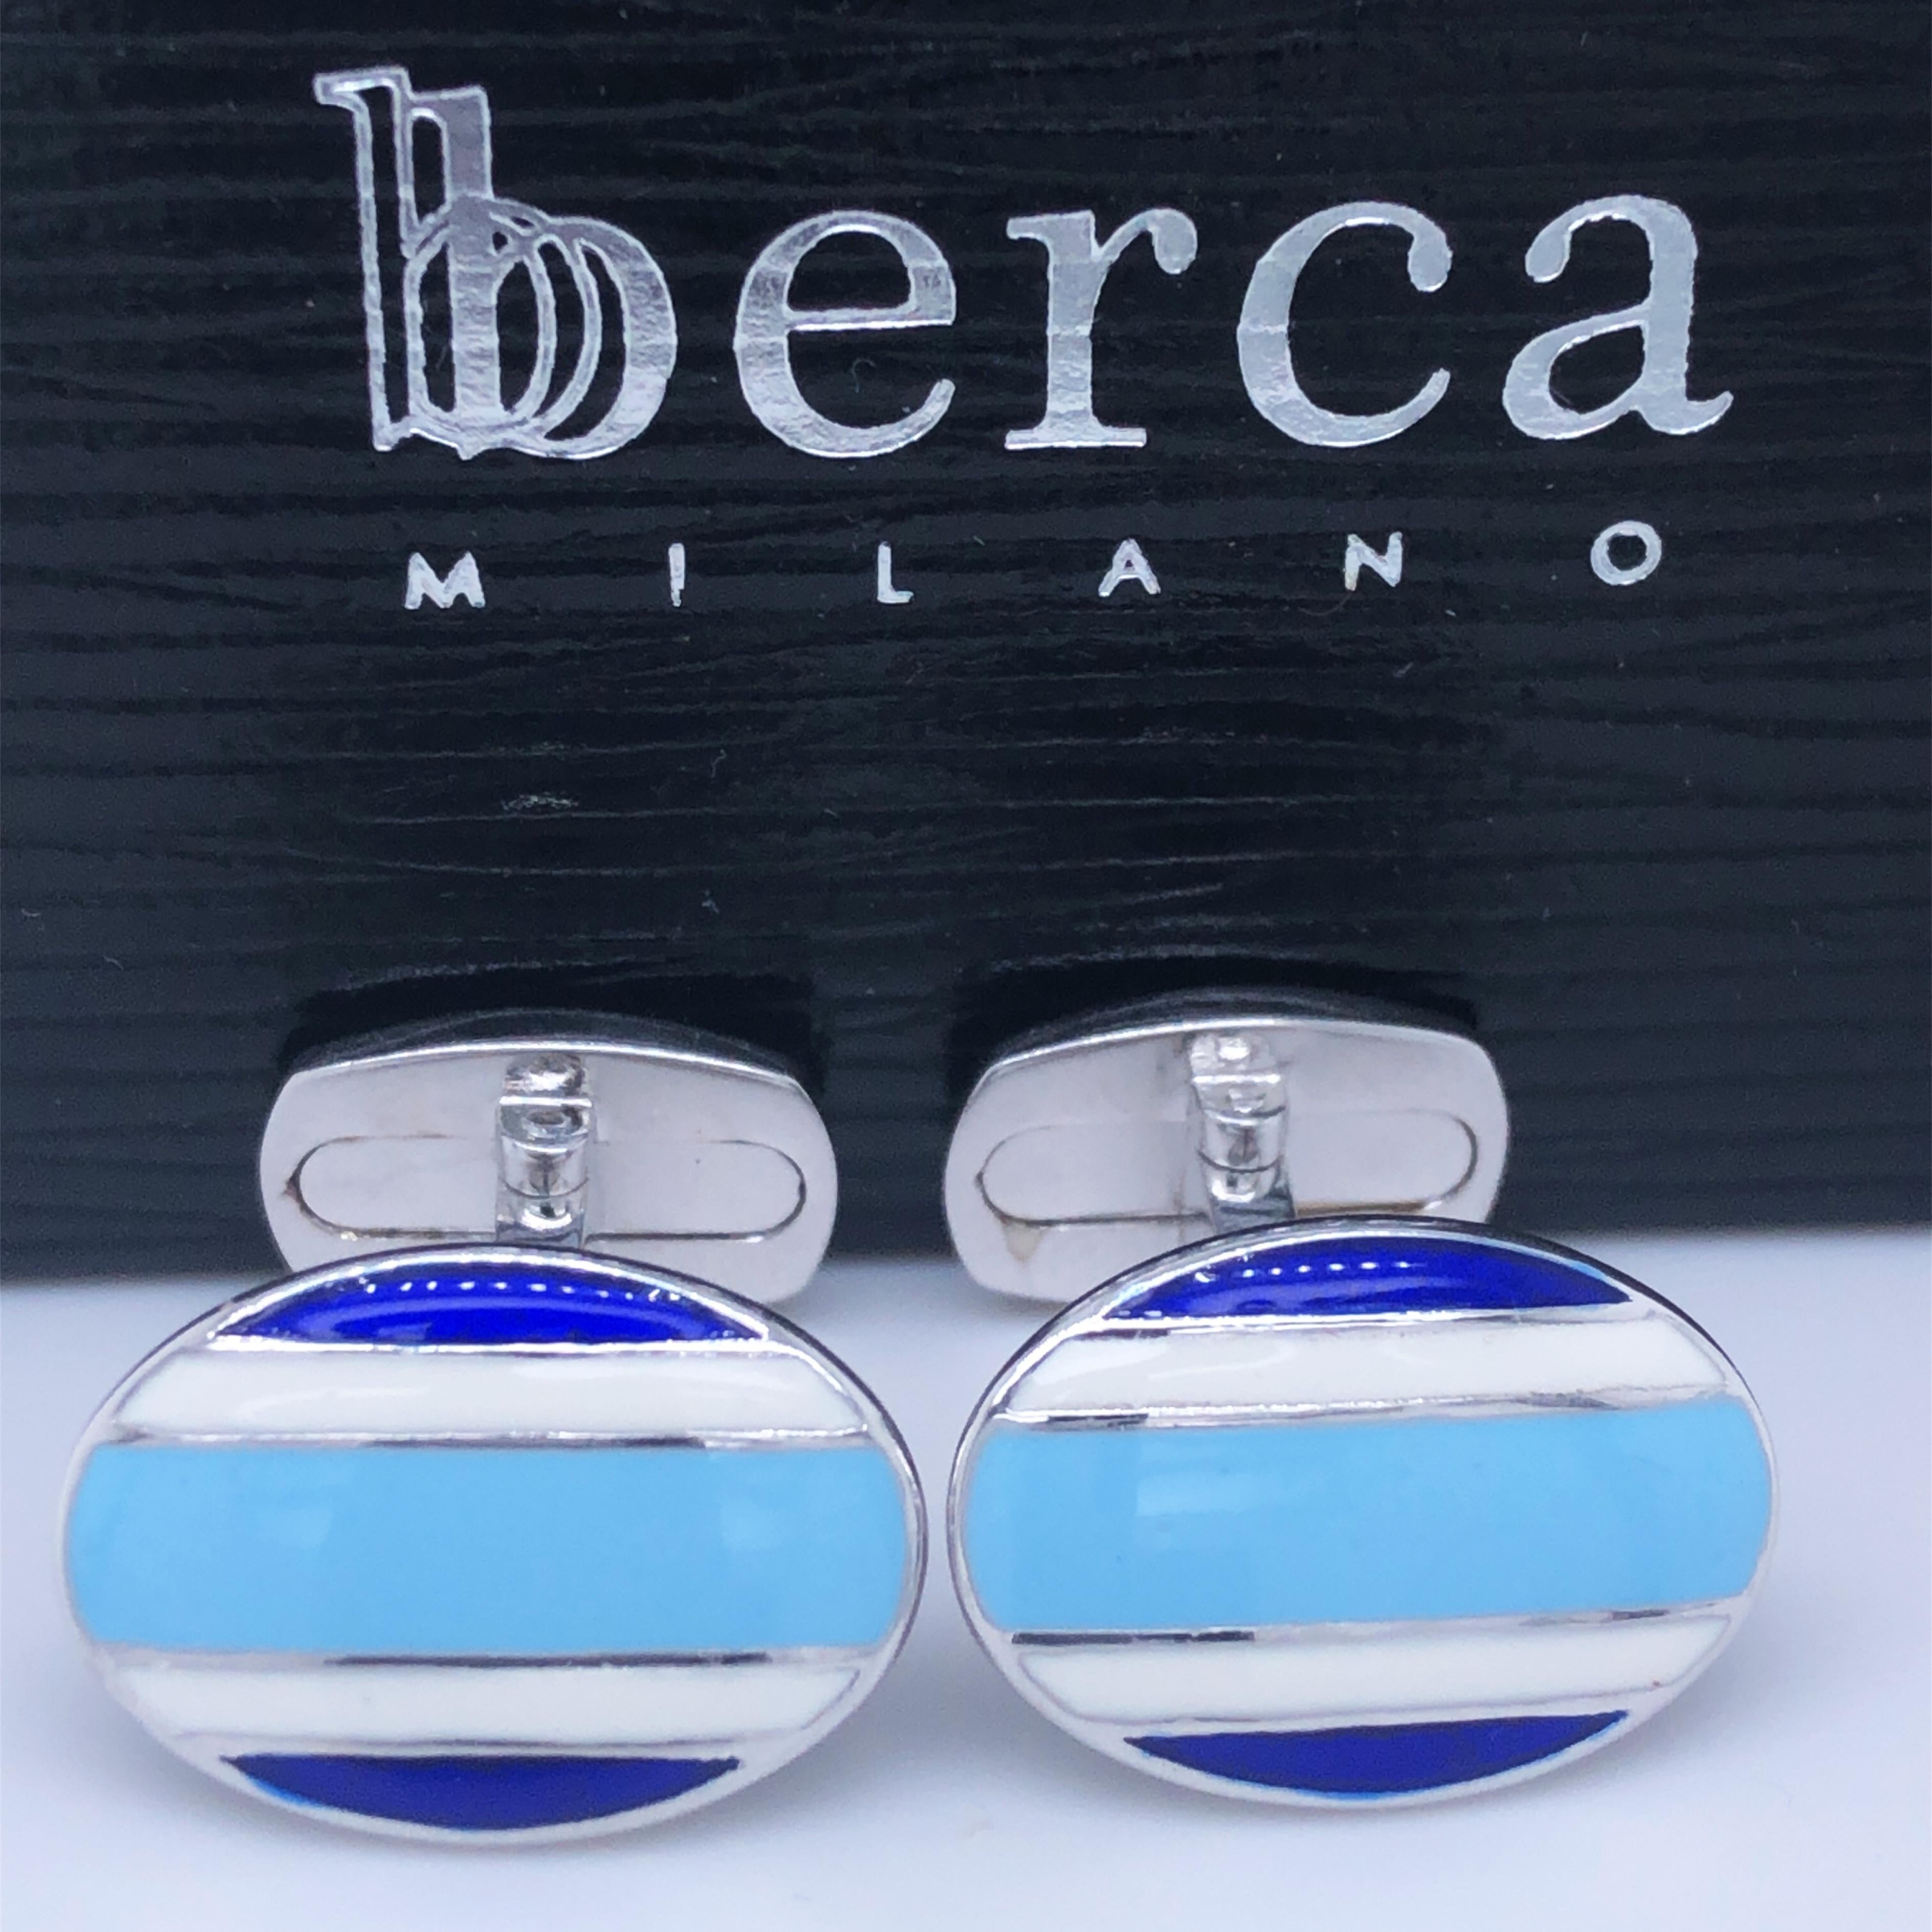 Chic Royal and Baby Blue Oval Shaped Sterling Silver T-Bar Back.
In our Fitted Black Box and Pouch.